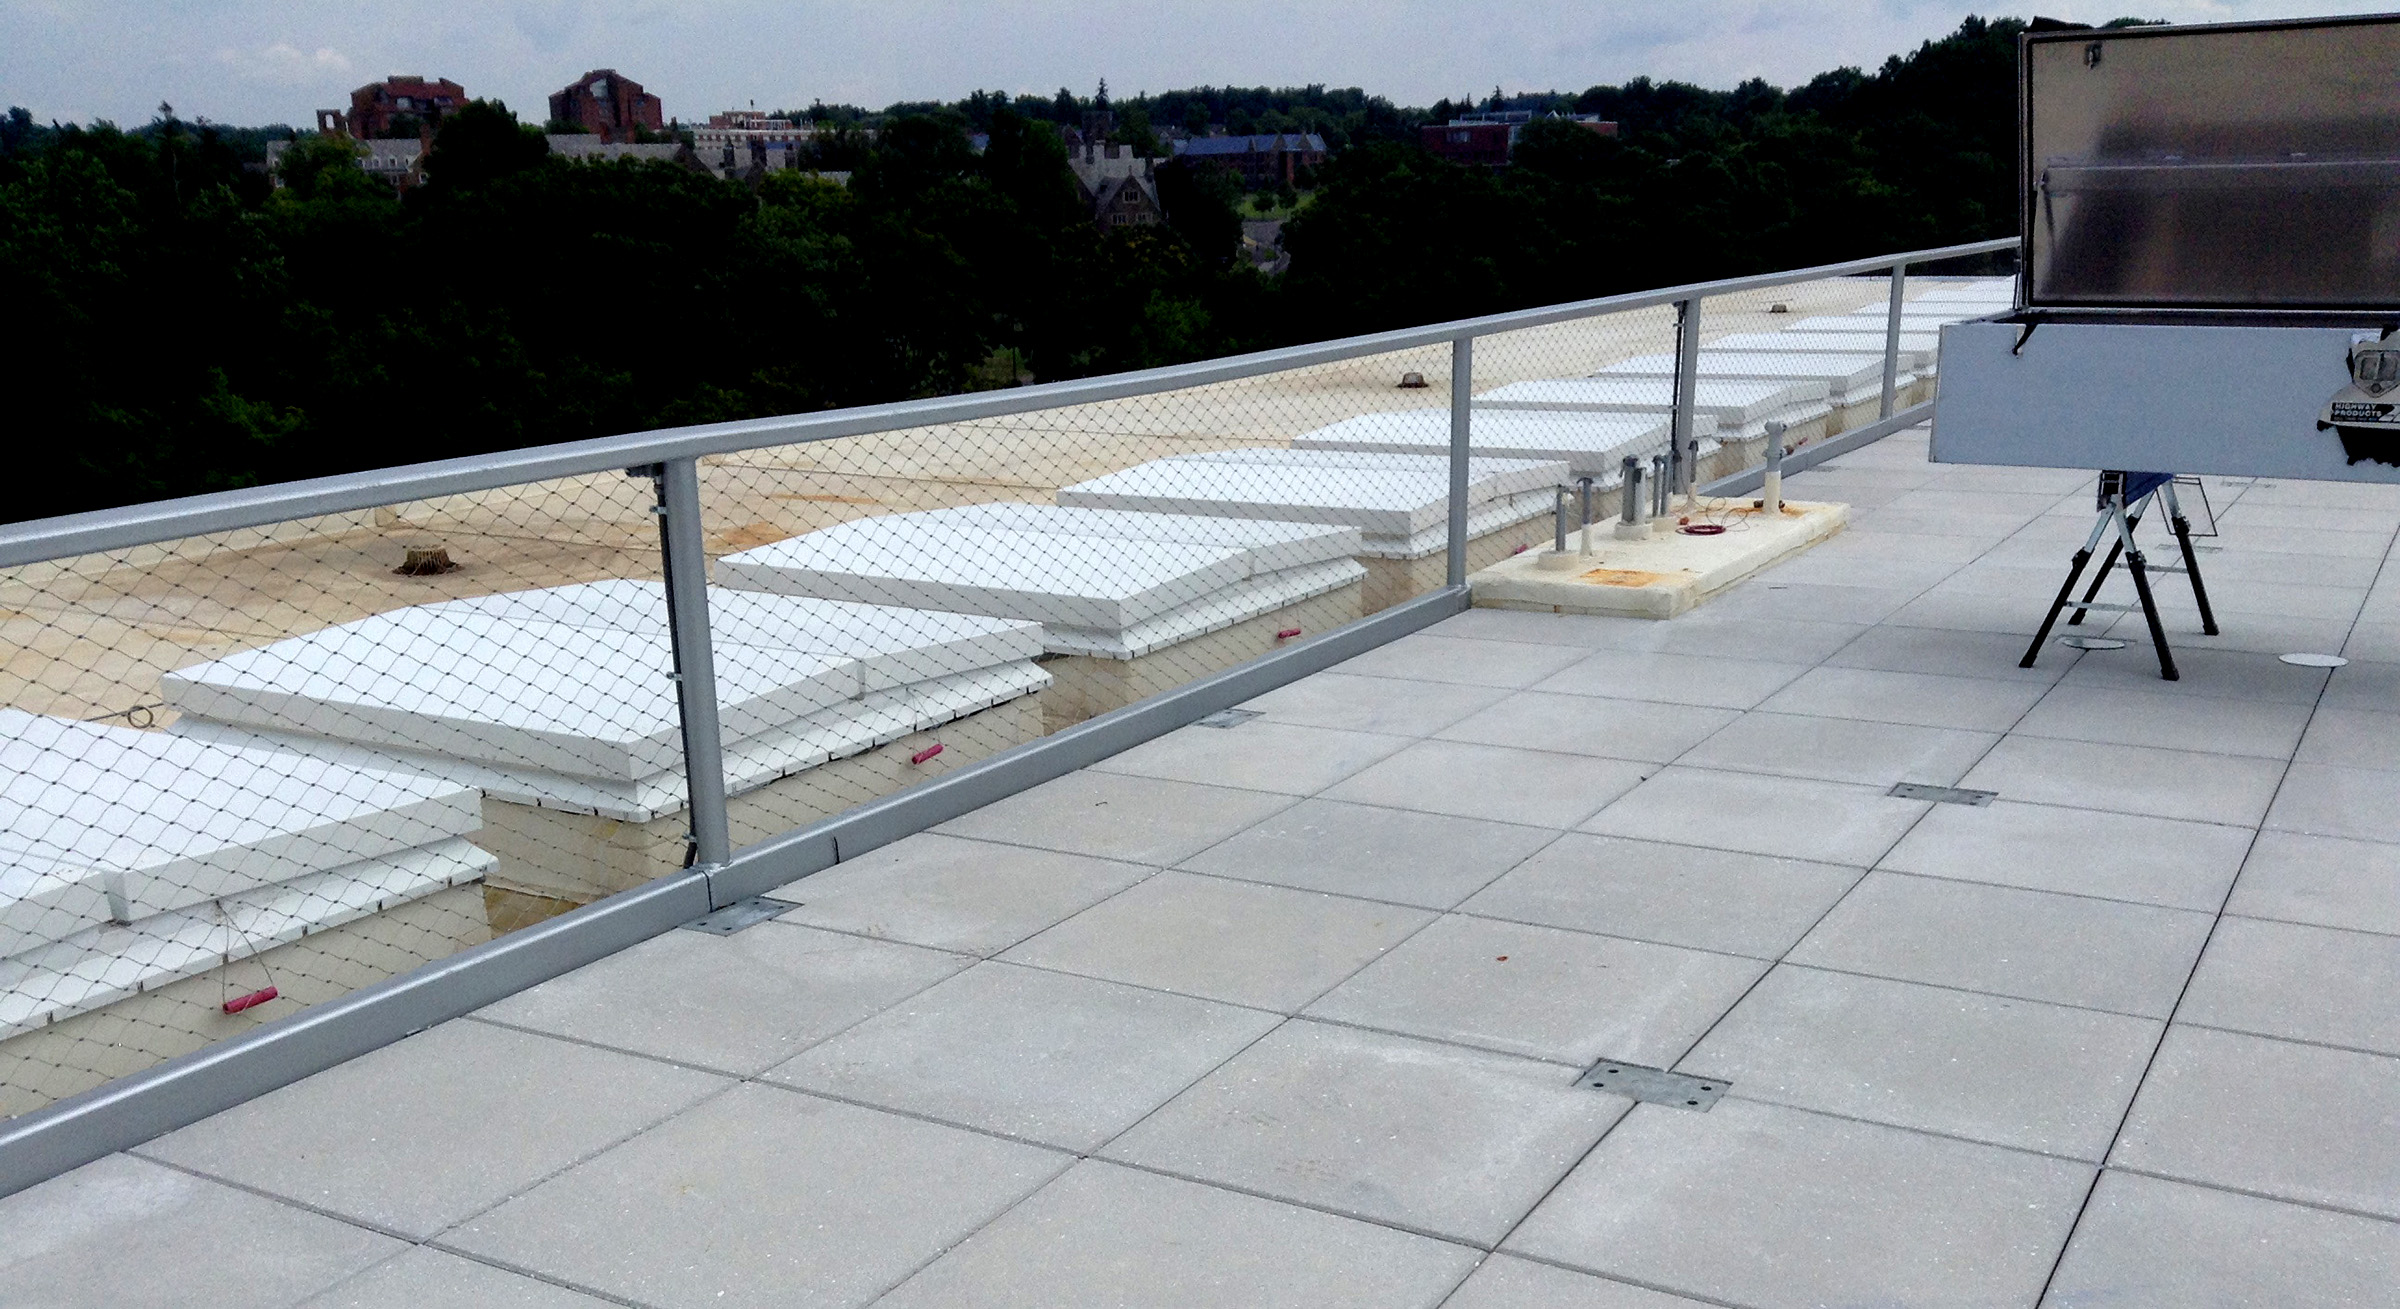 Rand Hall roof deck showing smoke exhaust vents